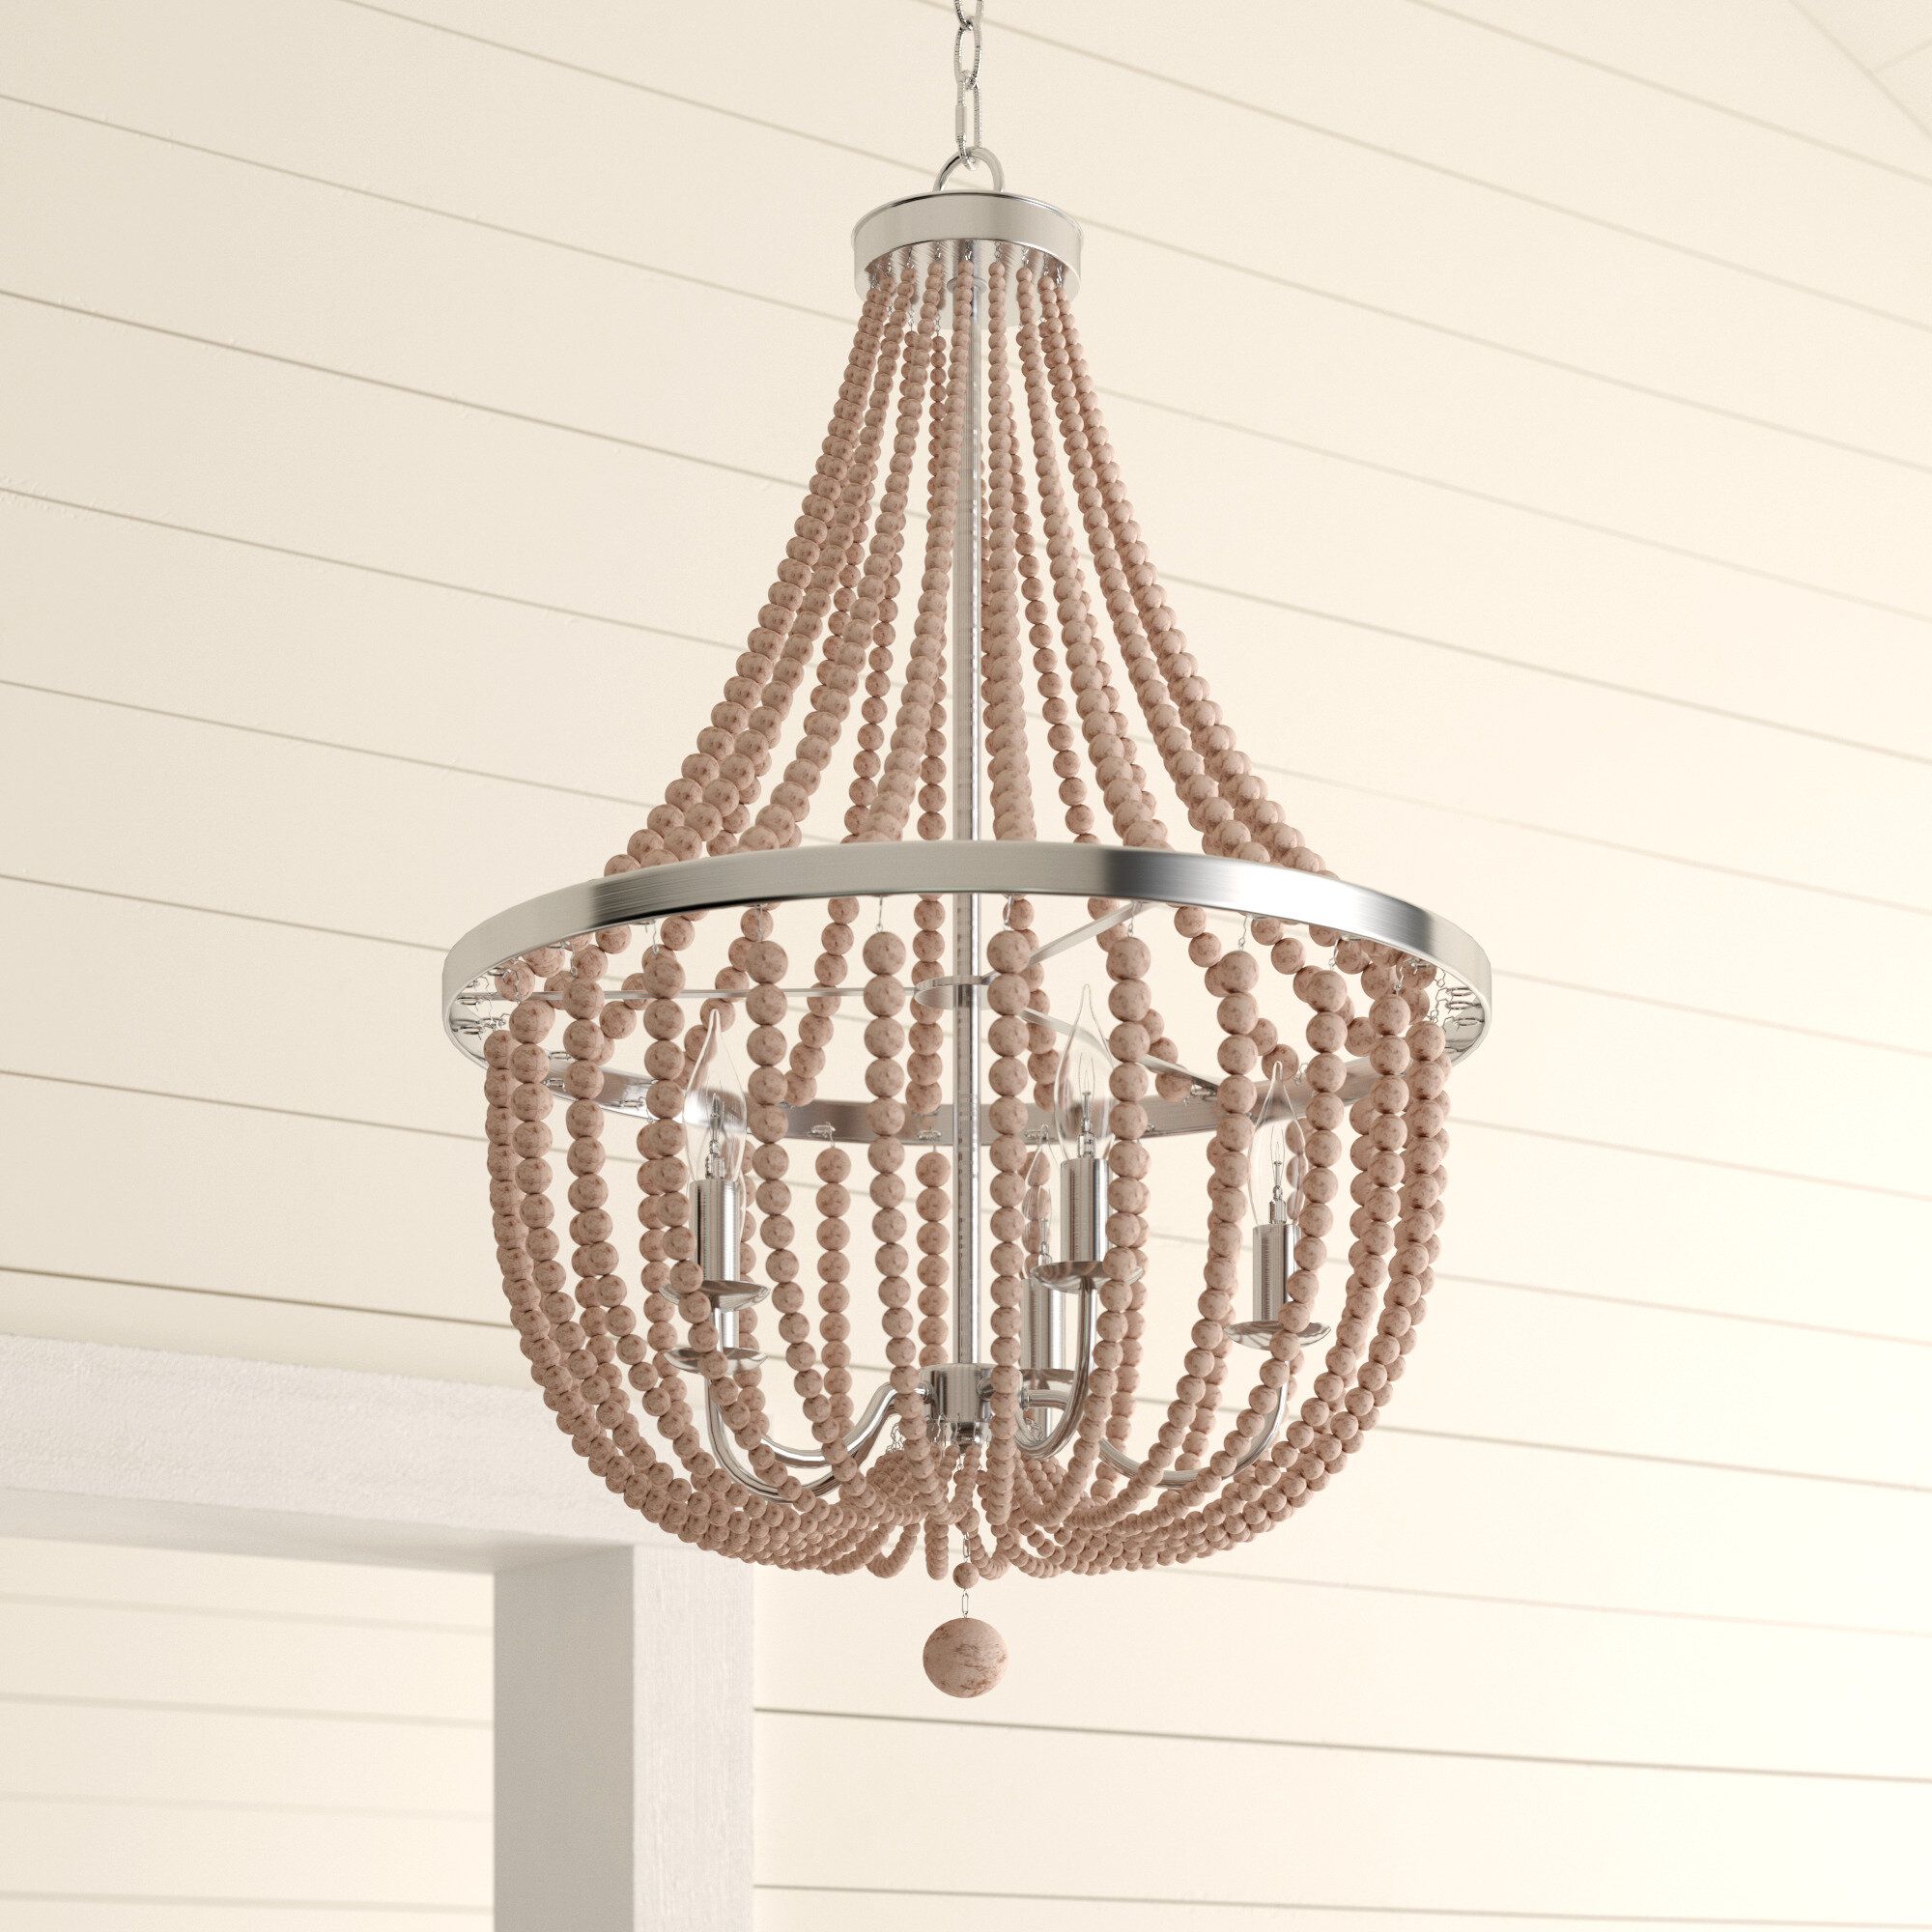 Bay Isle Home Tilden Wood Bead 5 Light Empire Chandelier Throughout Ladonna 5 Light Novelty Chandeliers (View 5 of 30)